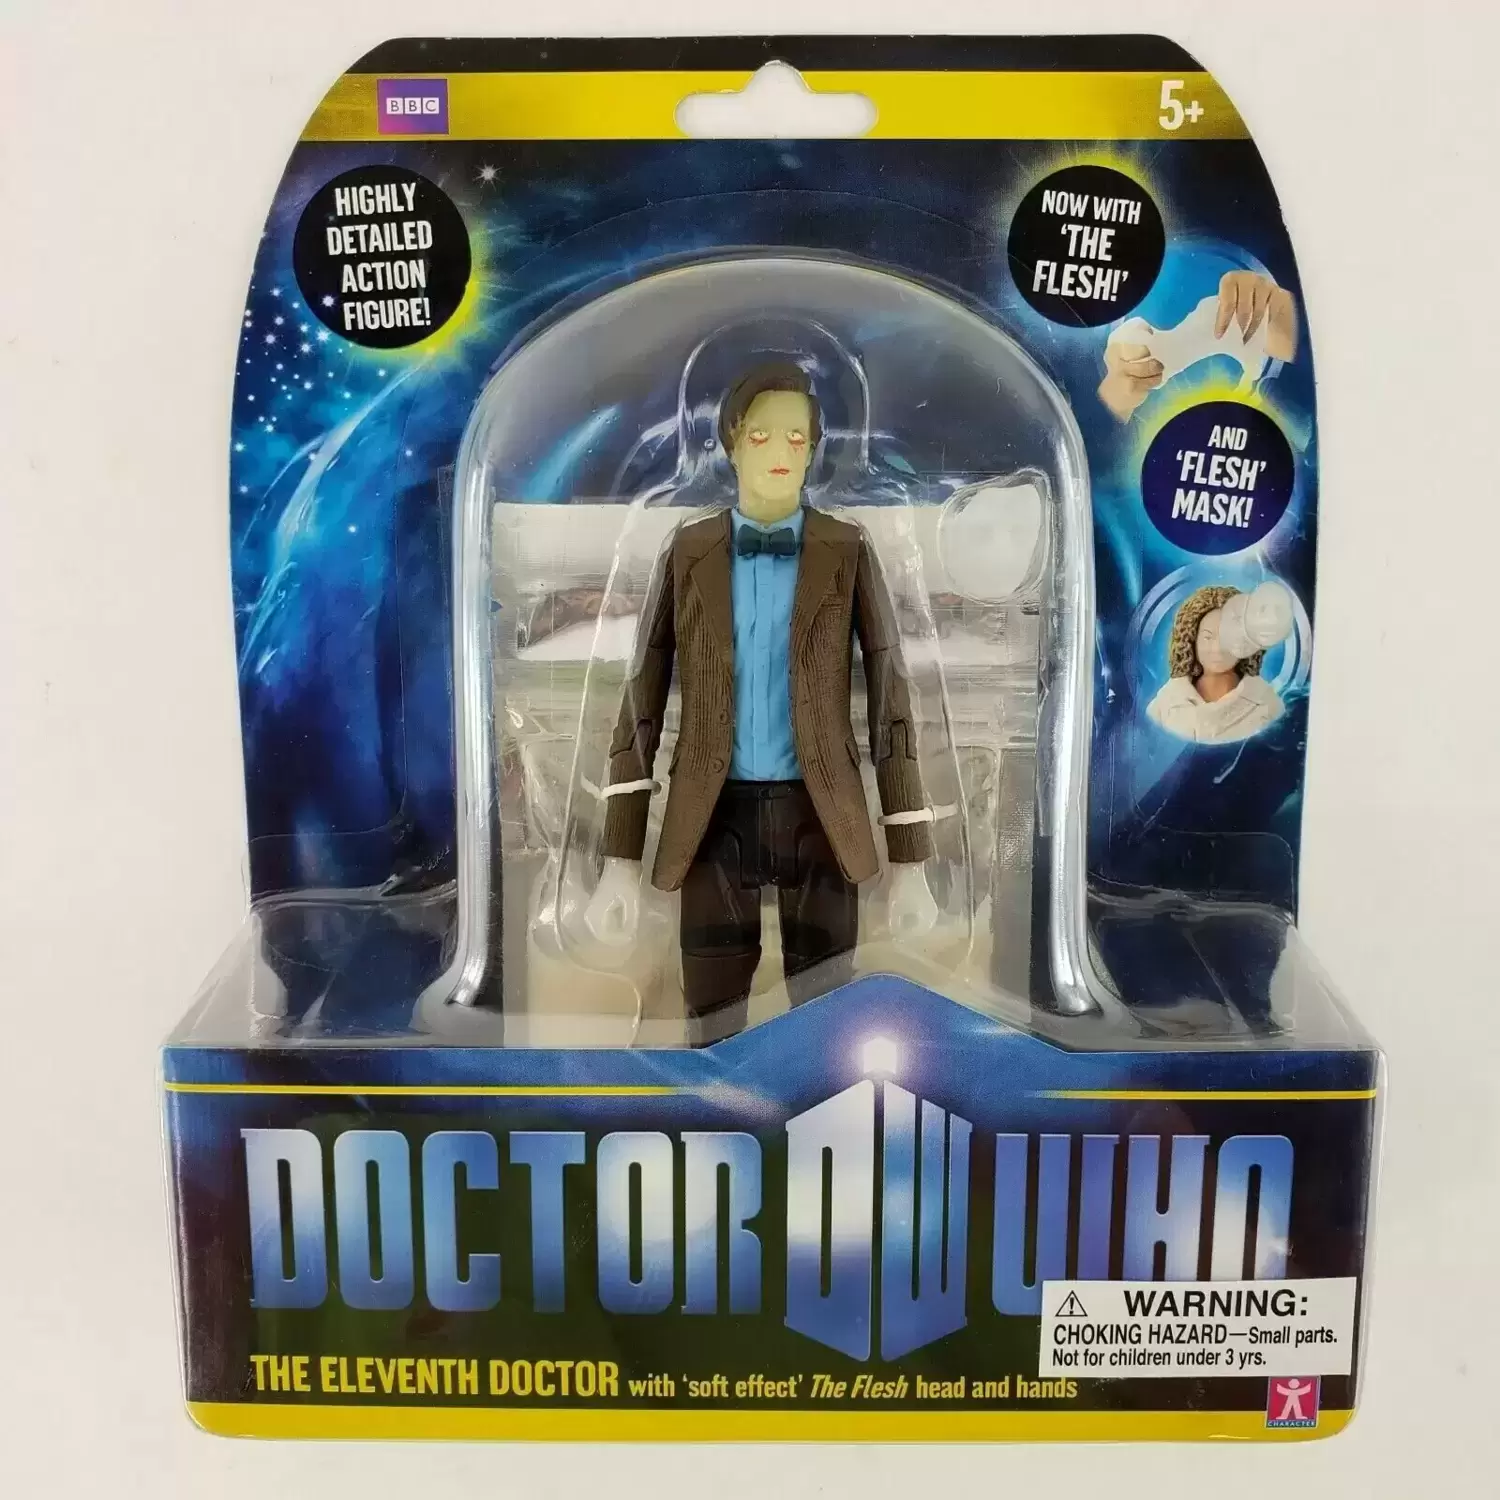 Action Figures - The Eleventh Doctor with Soft Effects The Flesh Head and Hands